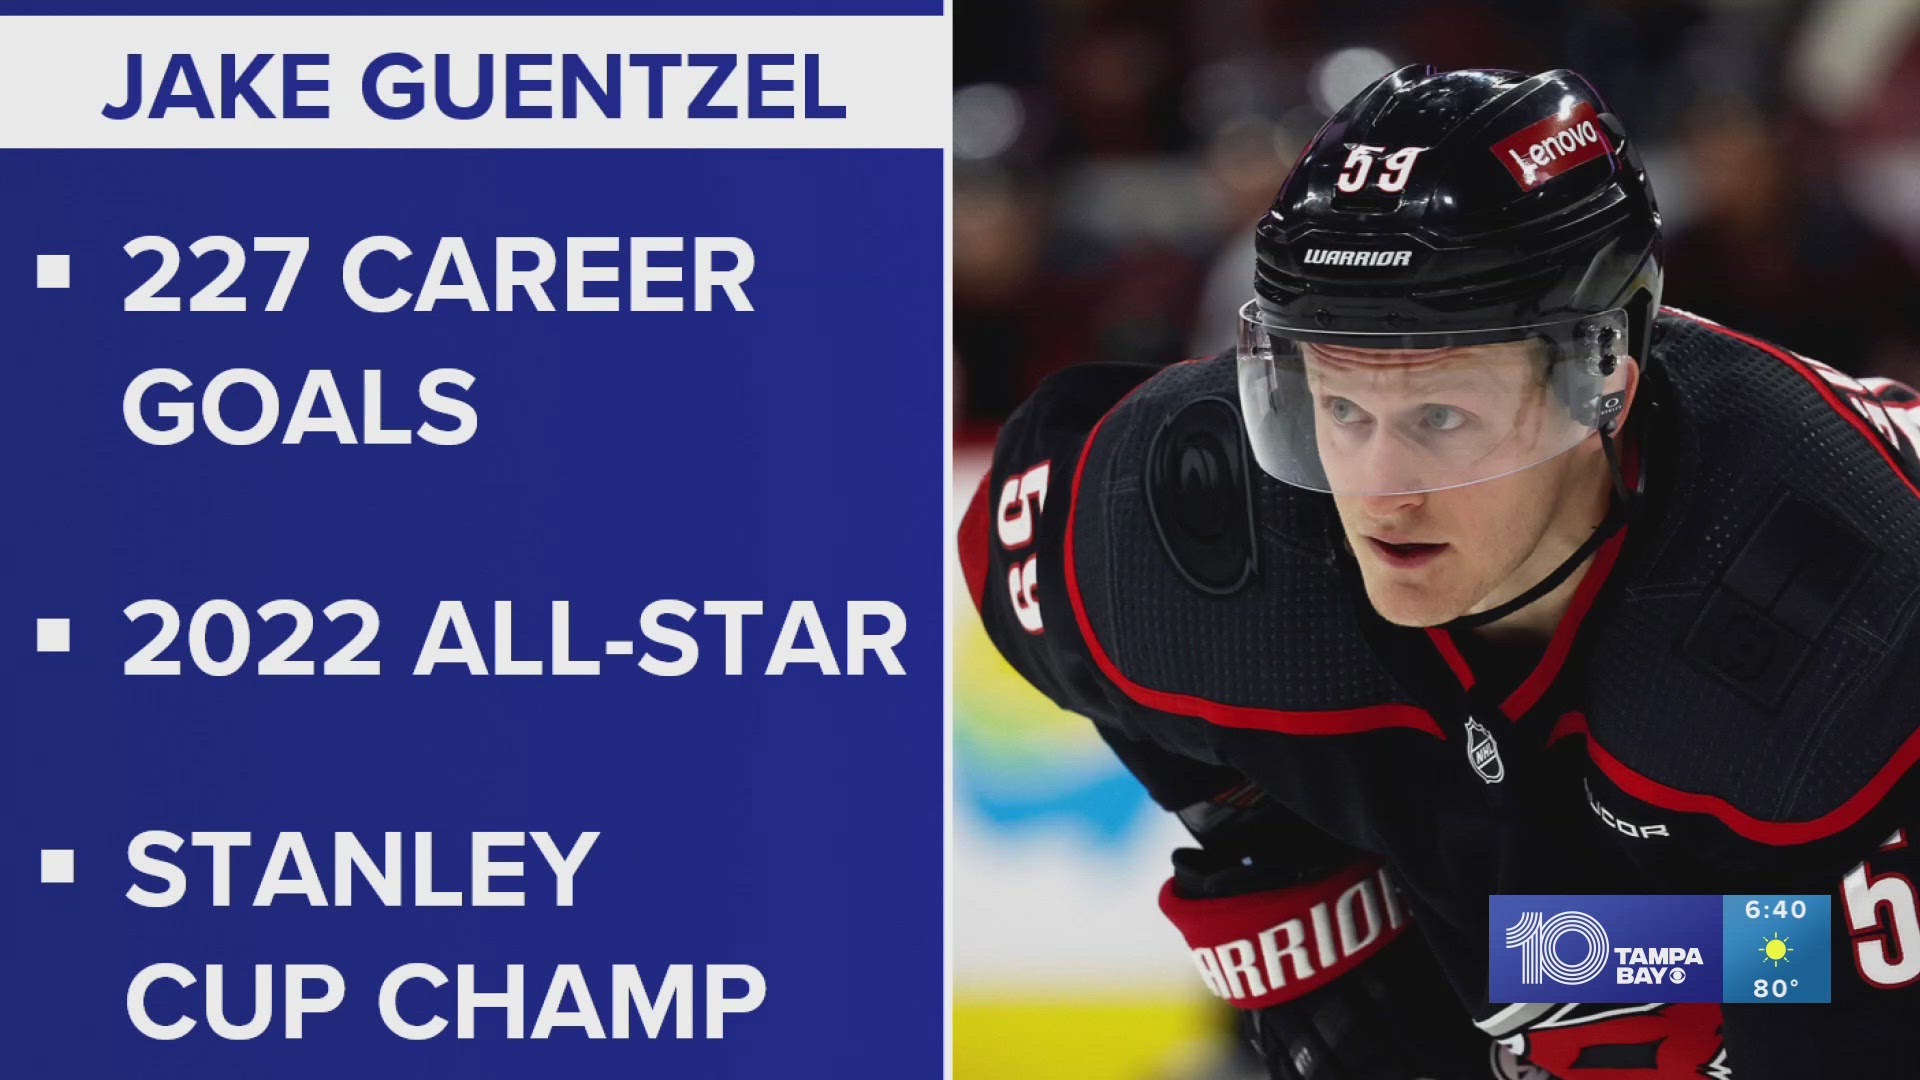 Jake Guentzel is a former all-star and Stlaney Cup champion with a contract worth $9 million per season.